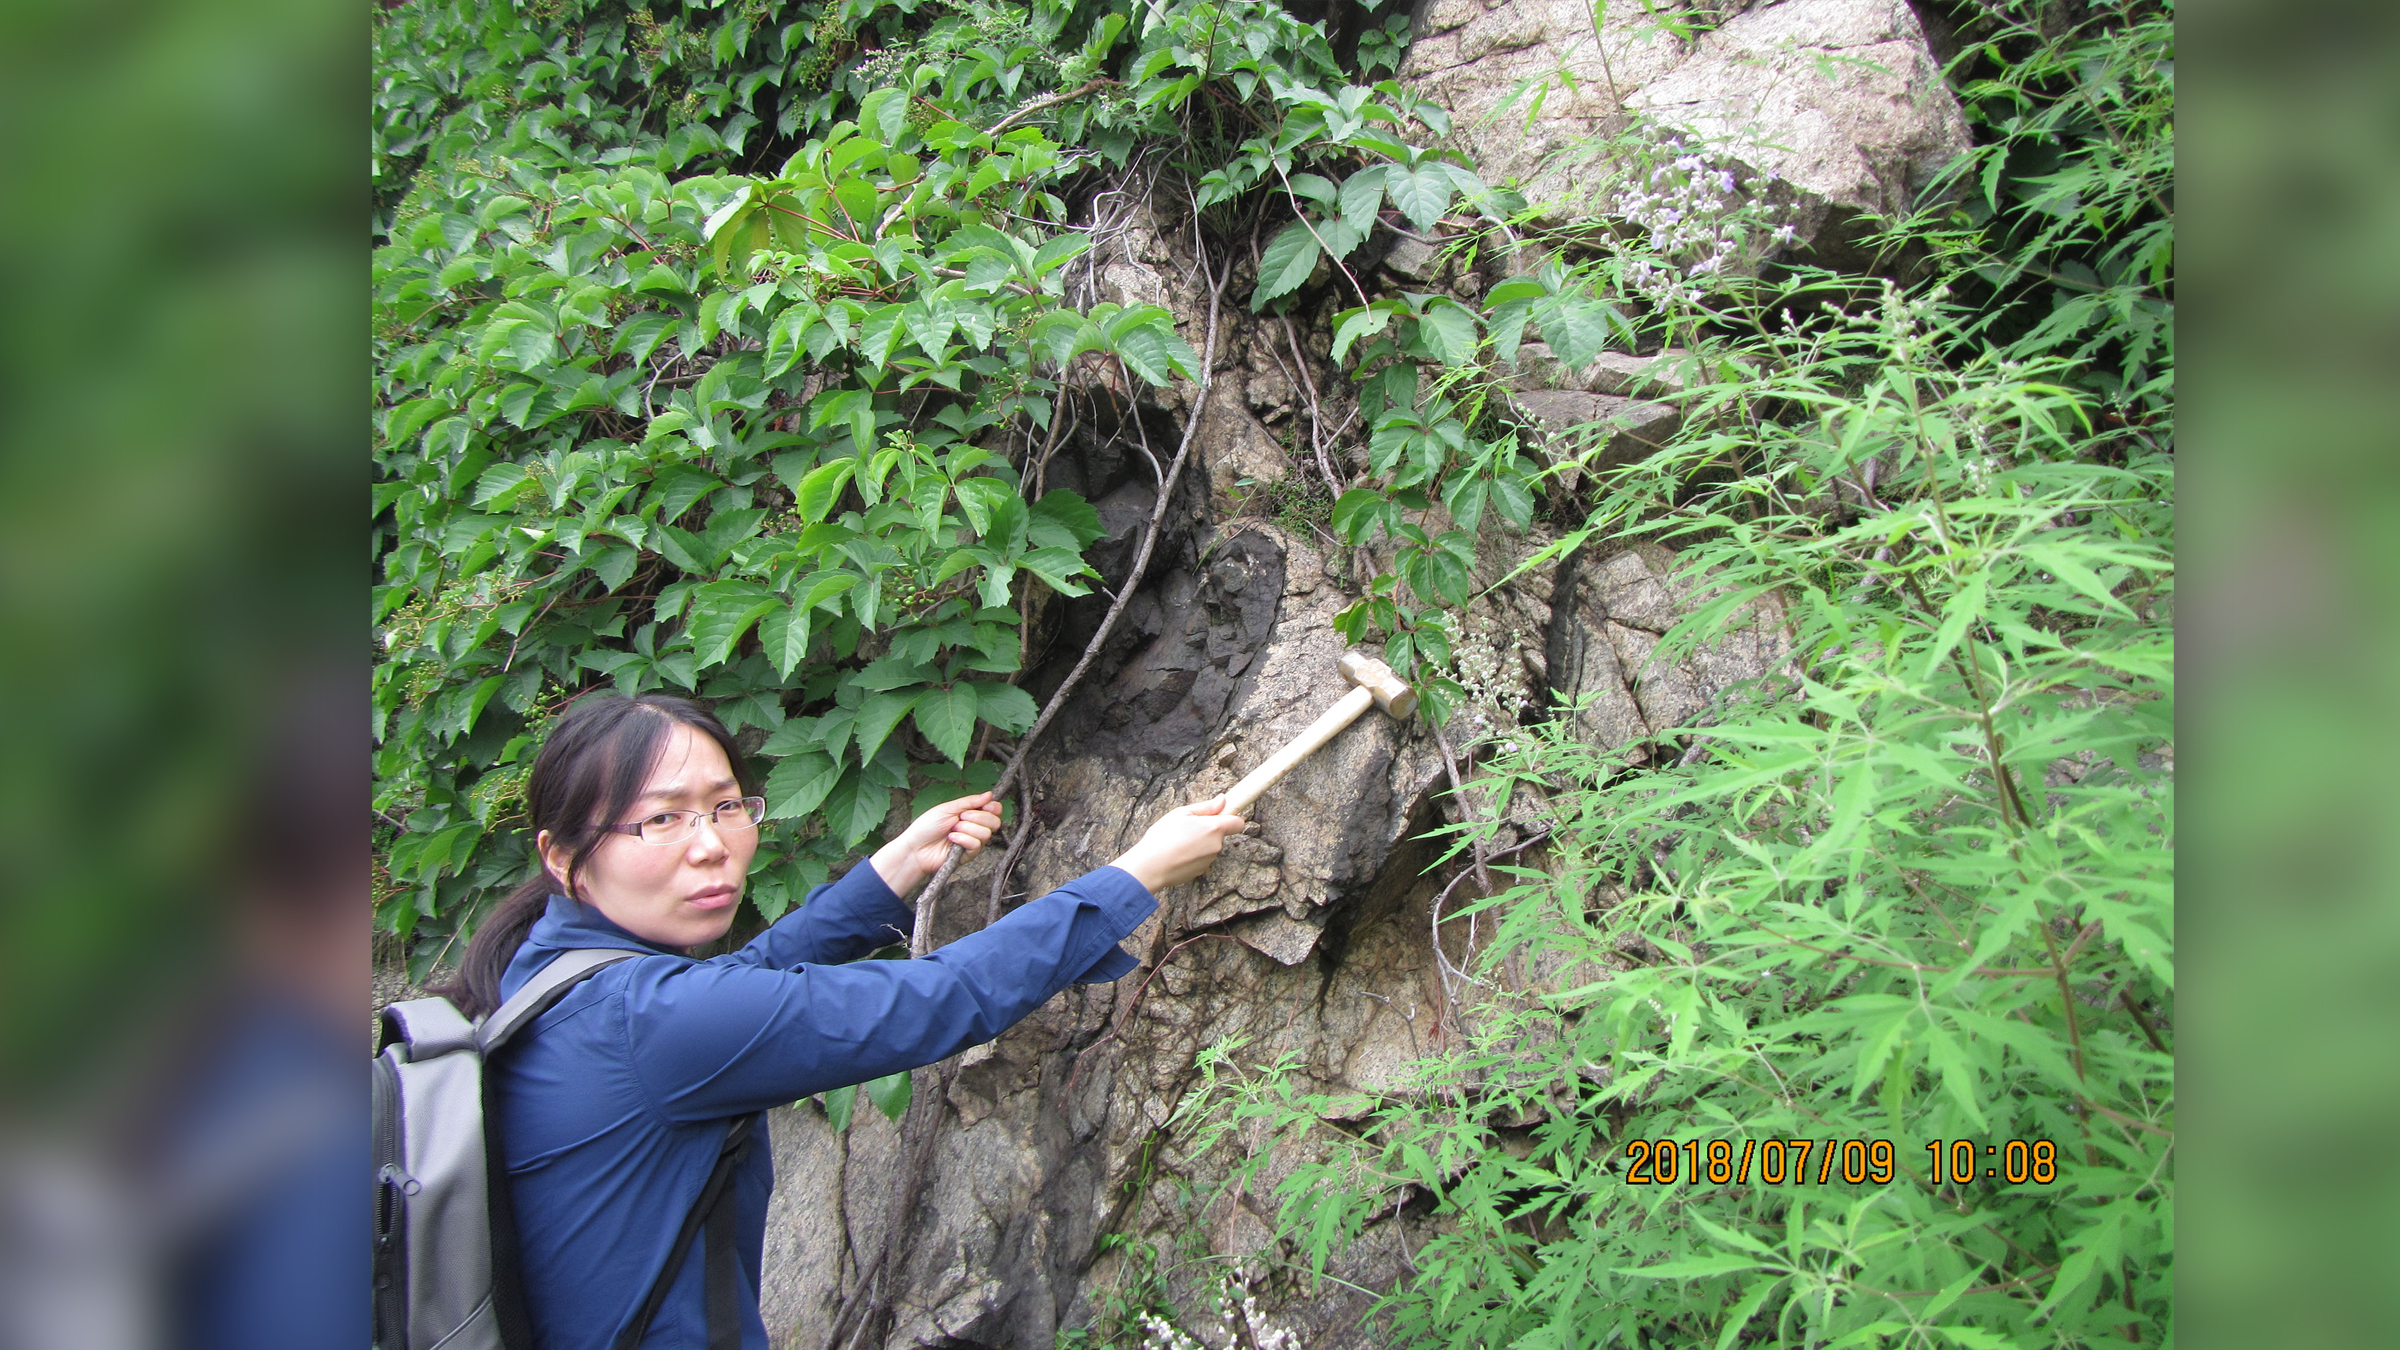 Lu Wang discovers dense bushes at the Archean eclogite site in Shangying, China.